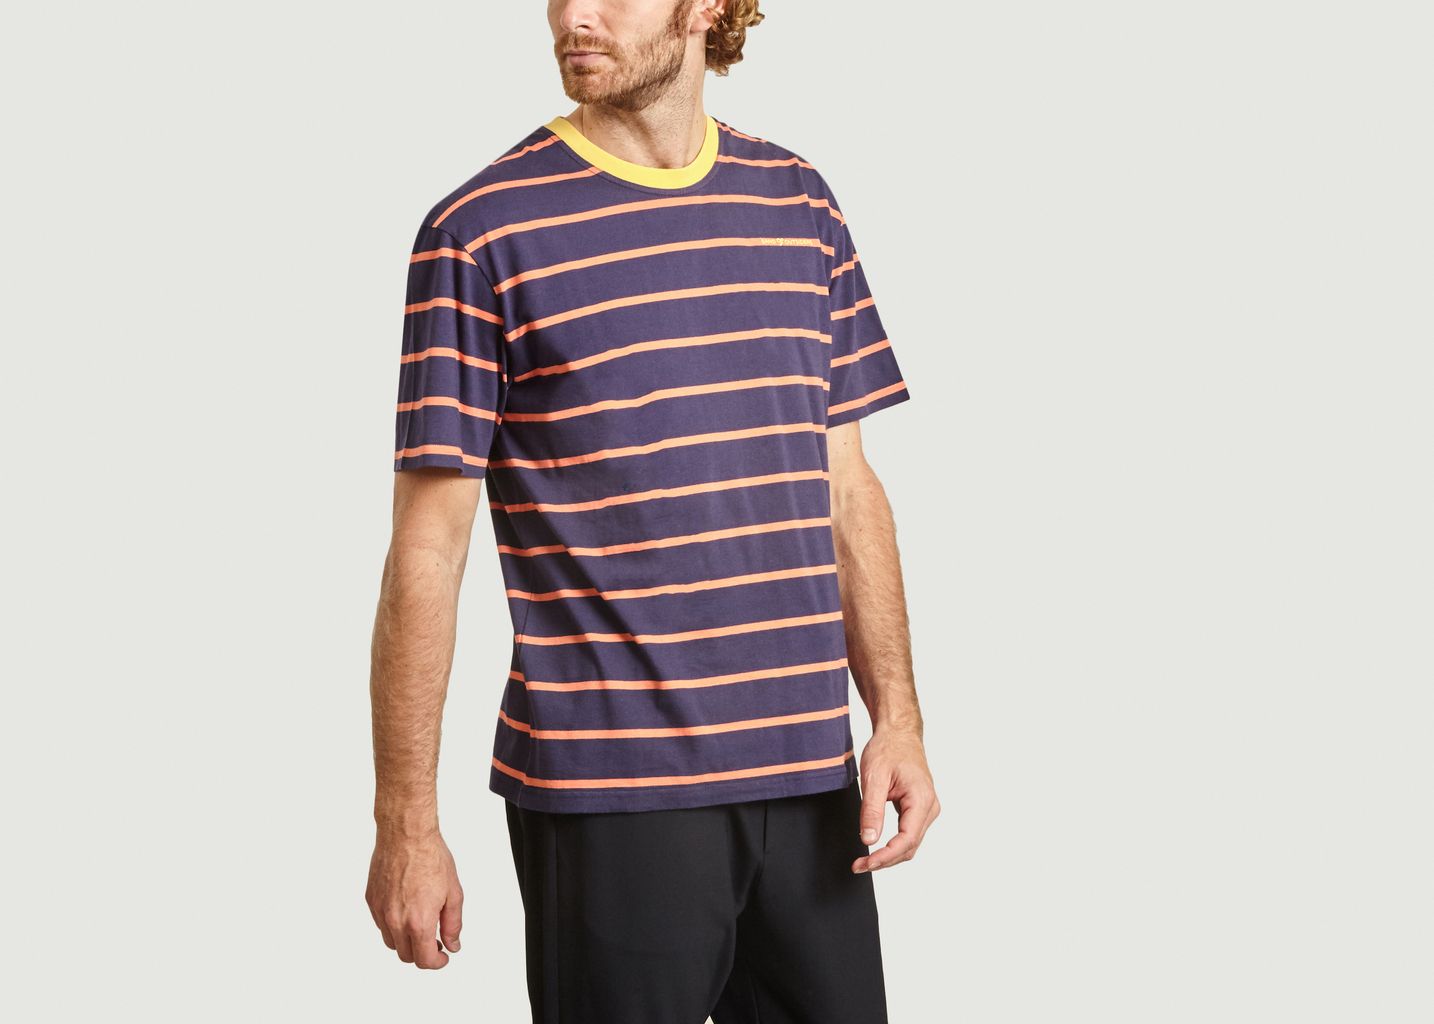 Oversize striped t-shirt - Band Of Outsiders